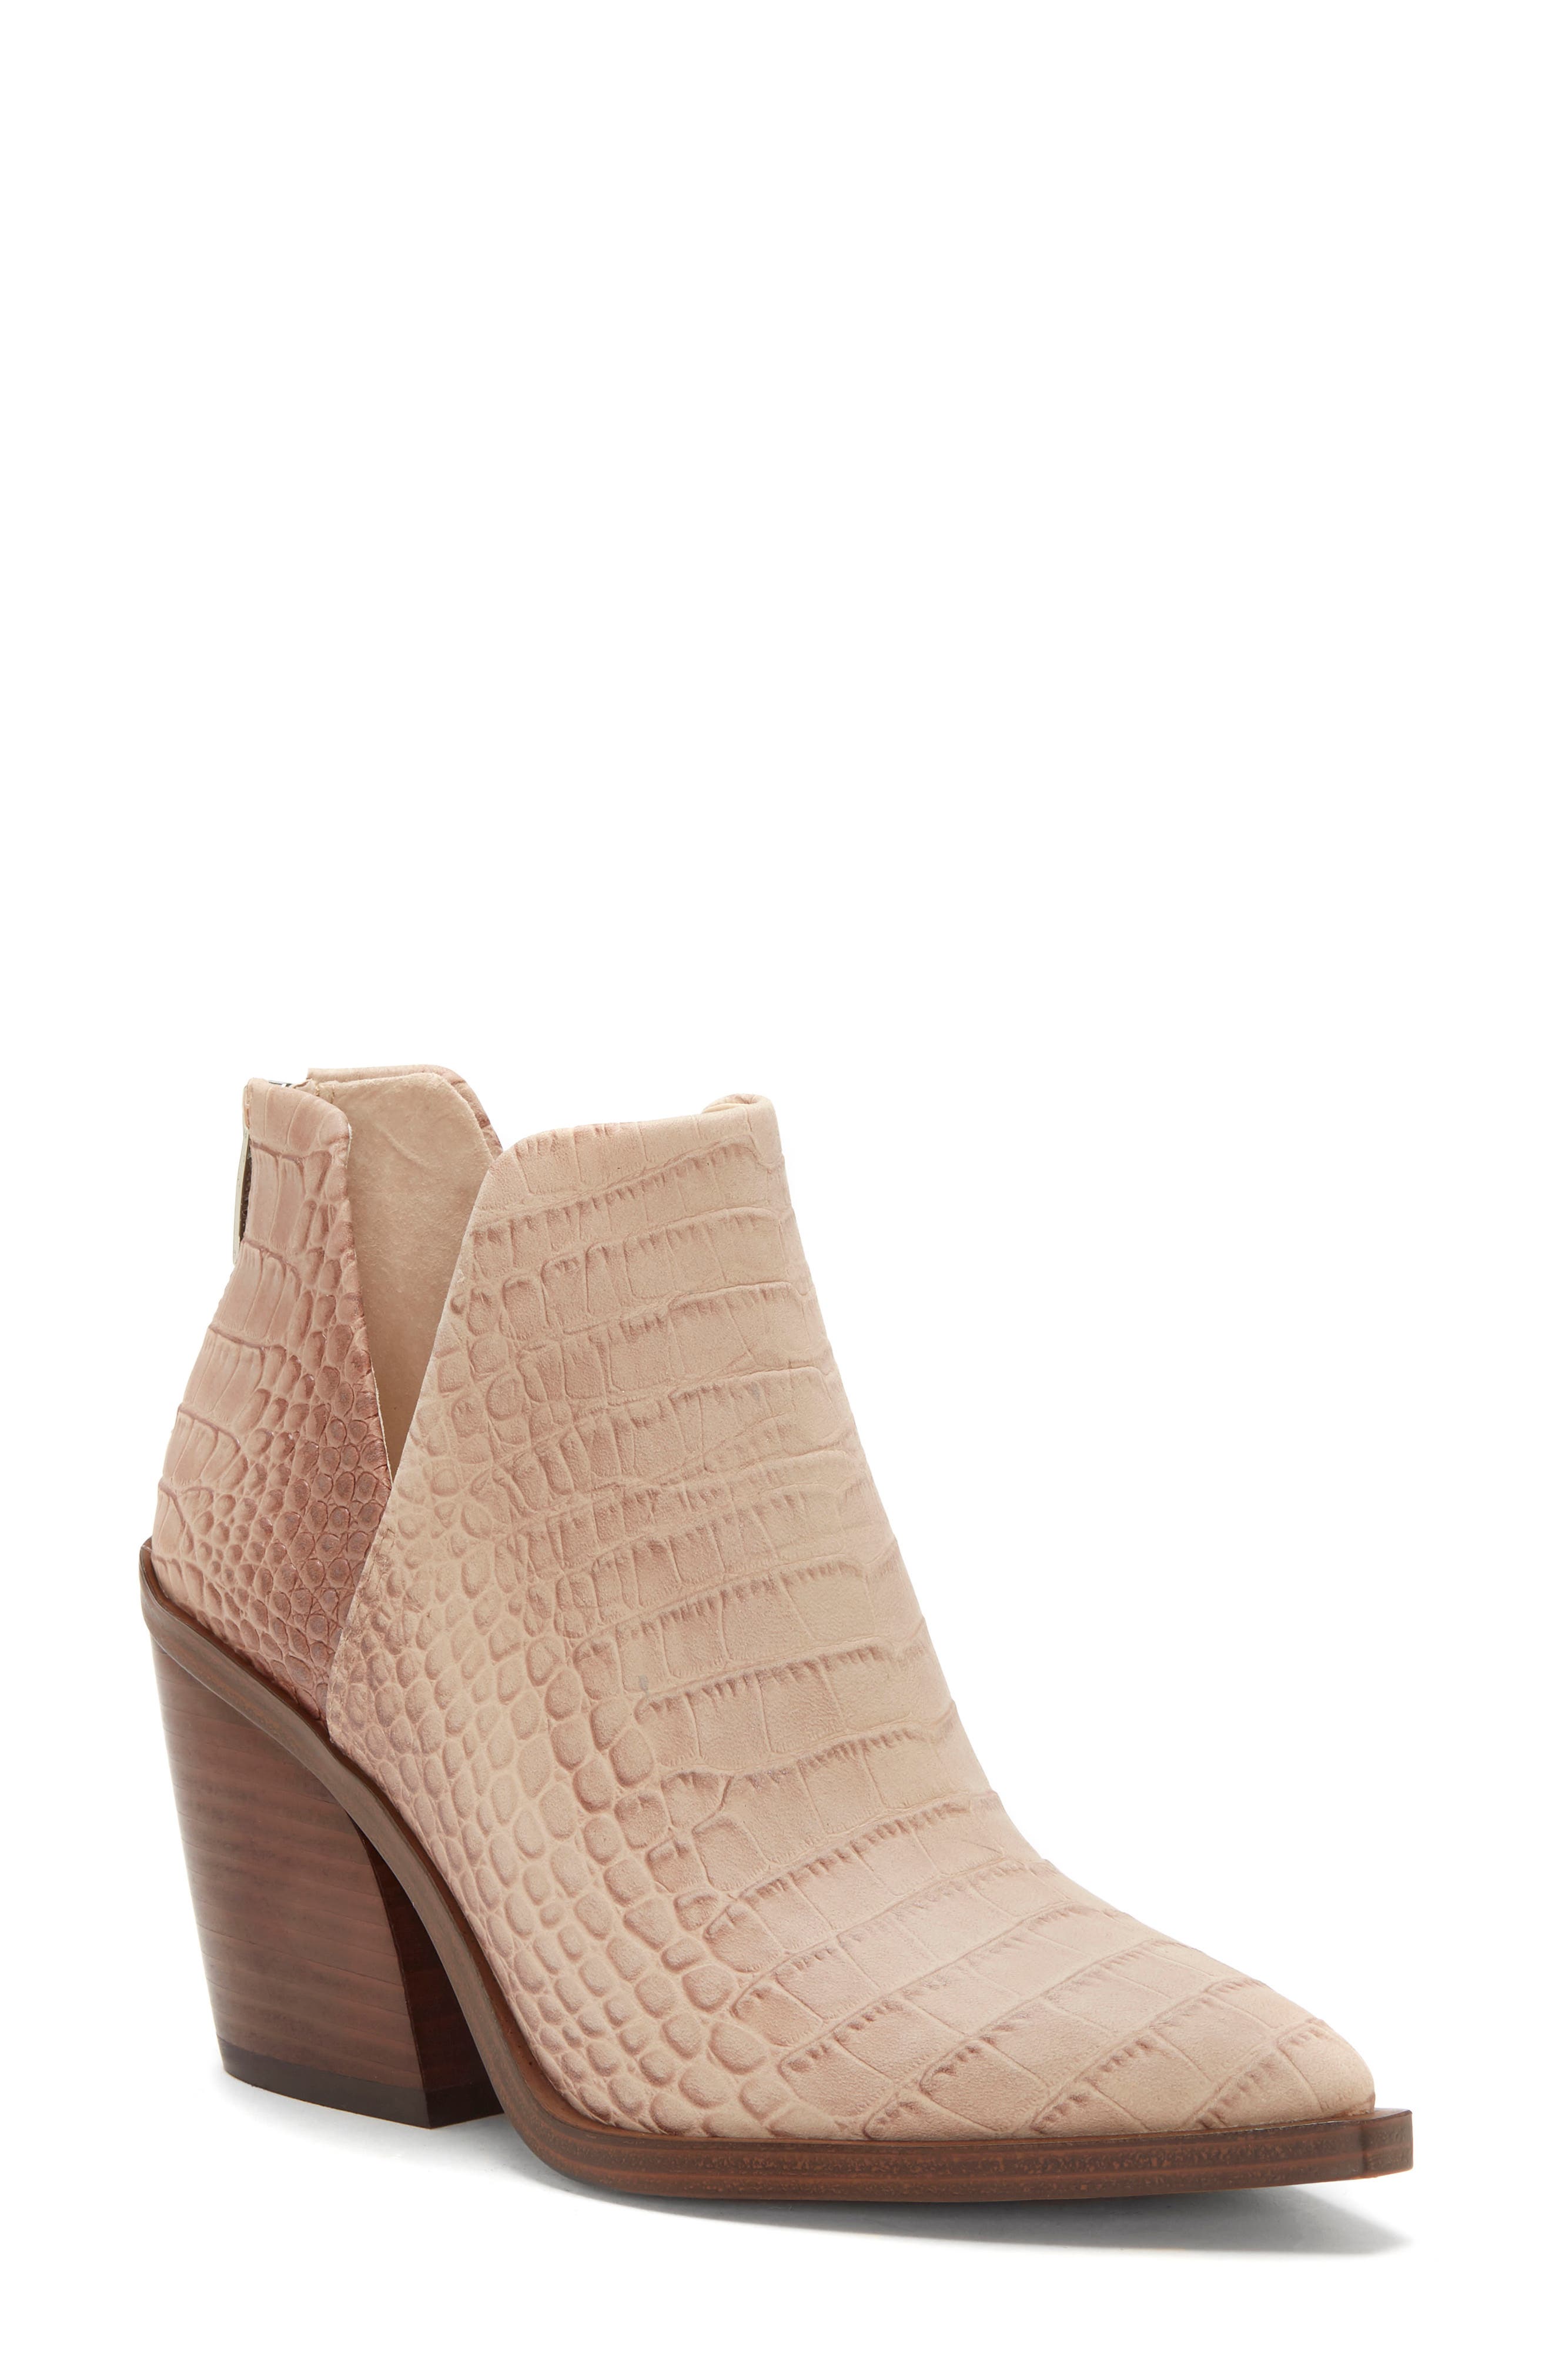 vince camuto clearance shoes